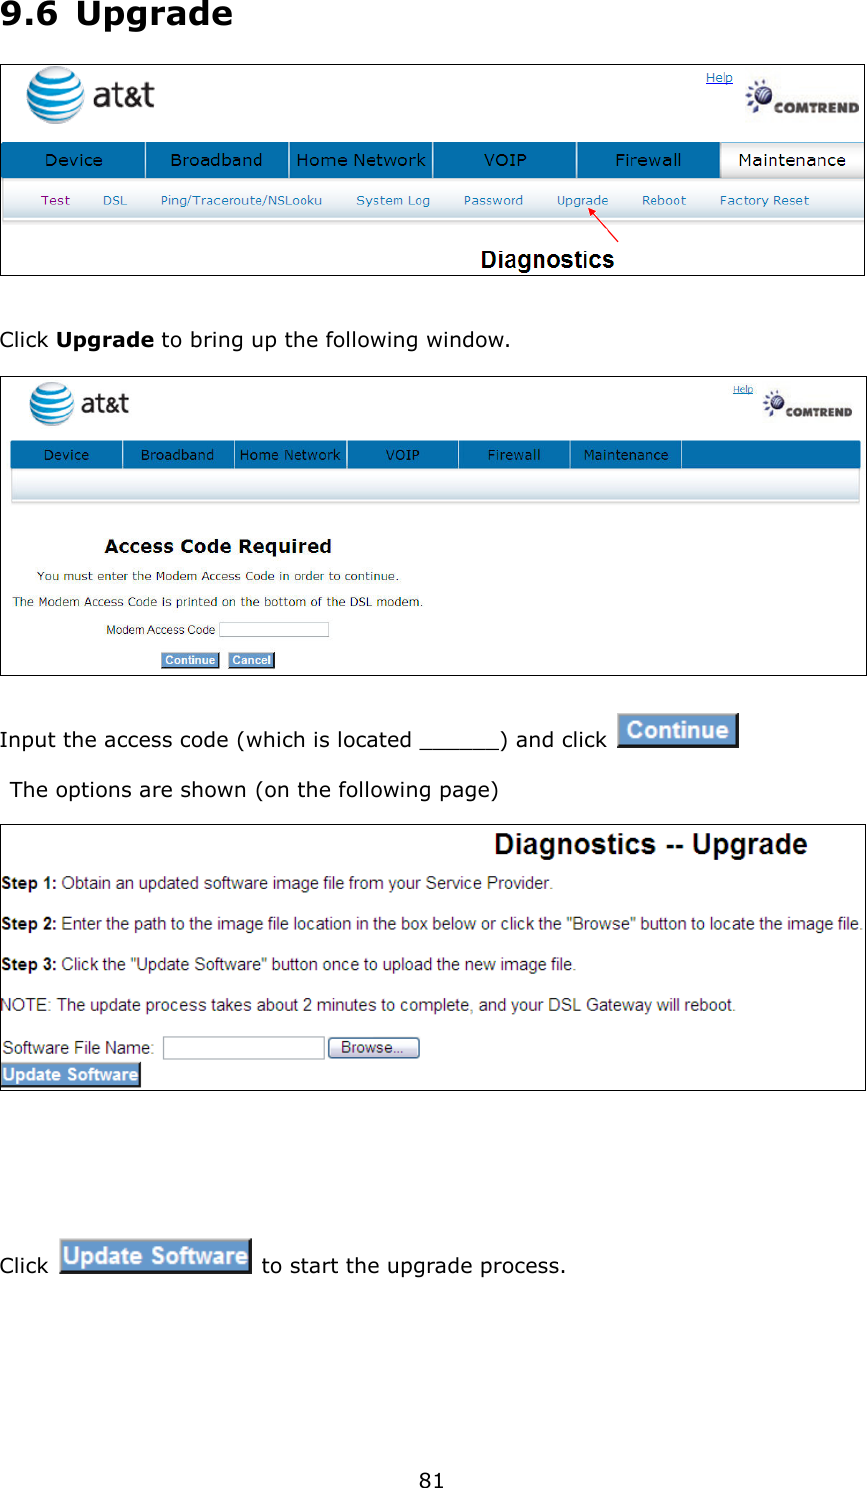 81 9.6  Upgrade   Click Upgrade to bring up the following window. Input the access code (which is located ______) and click     The options are shown (on the following page)     Click    to start the upgrade process.   